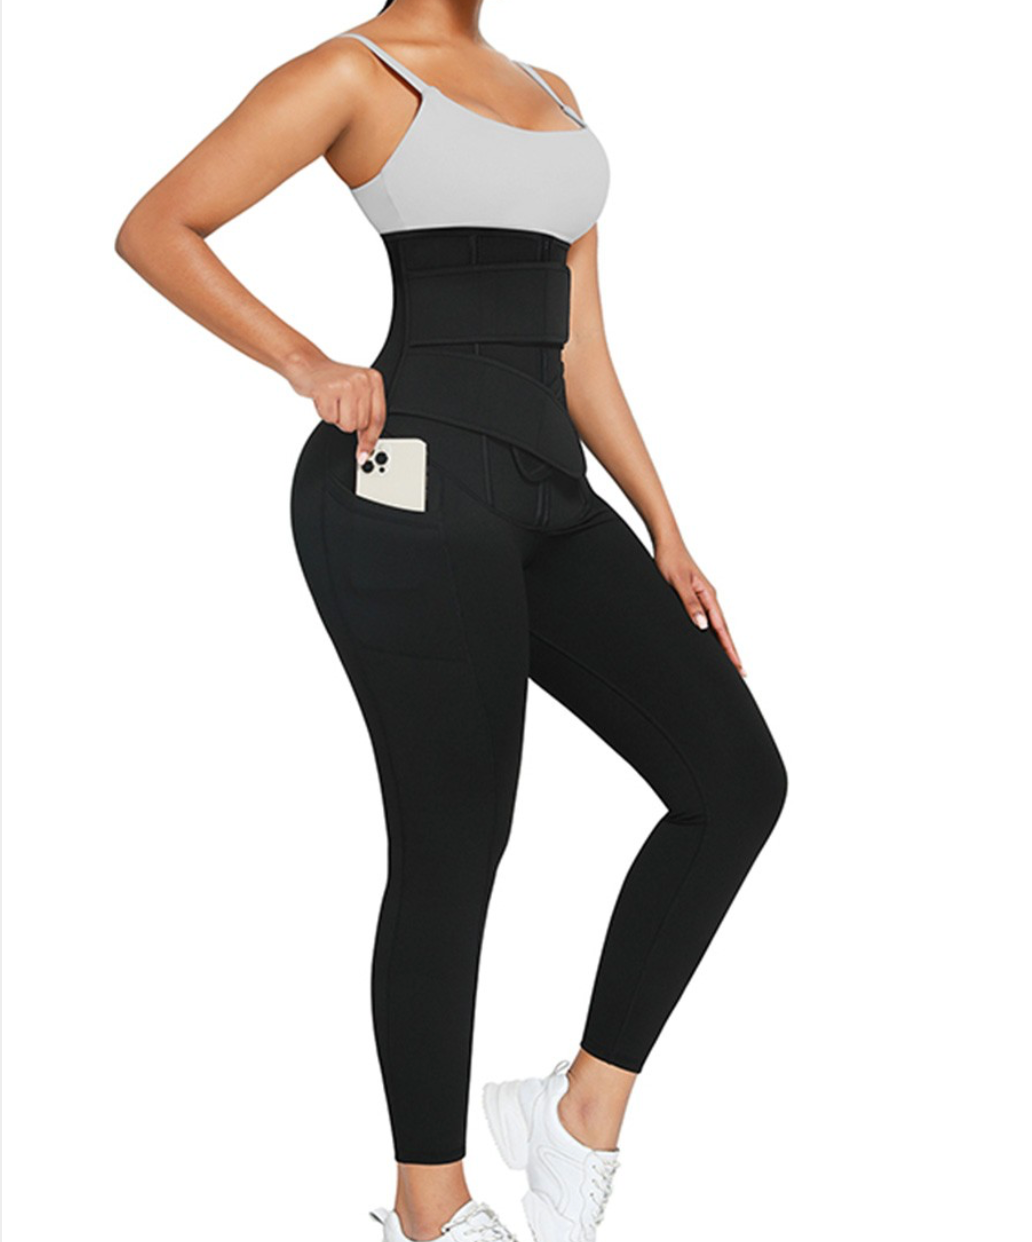 Black Double Belt Waist Trimmer Tummy Control Leggings With Blue Pu Coated Lining - Snatch Bans